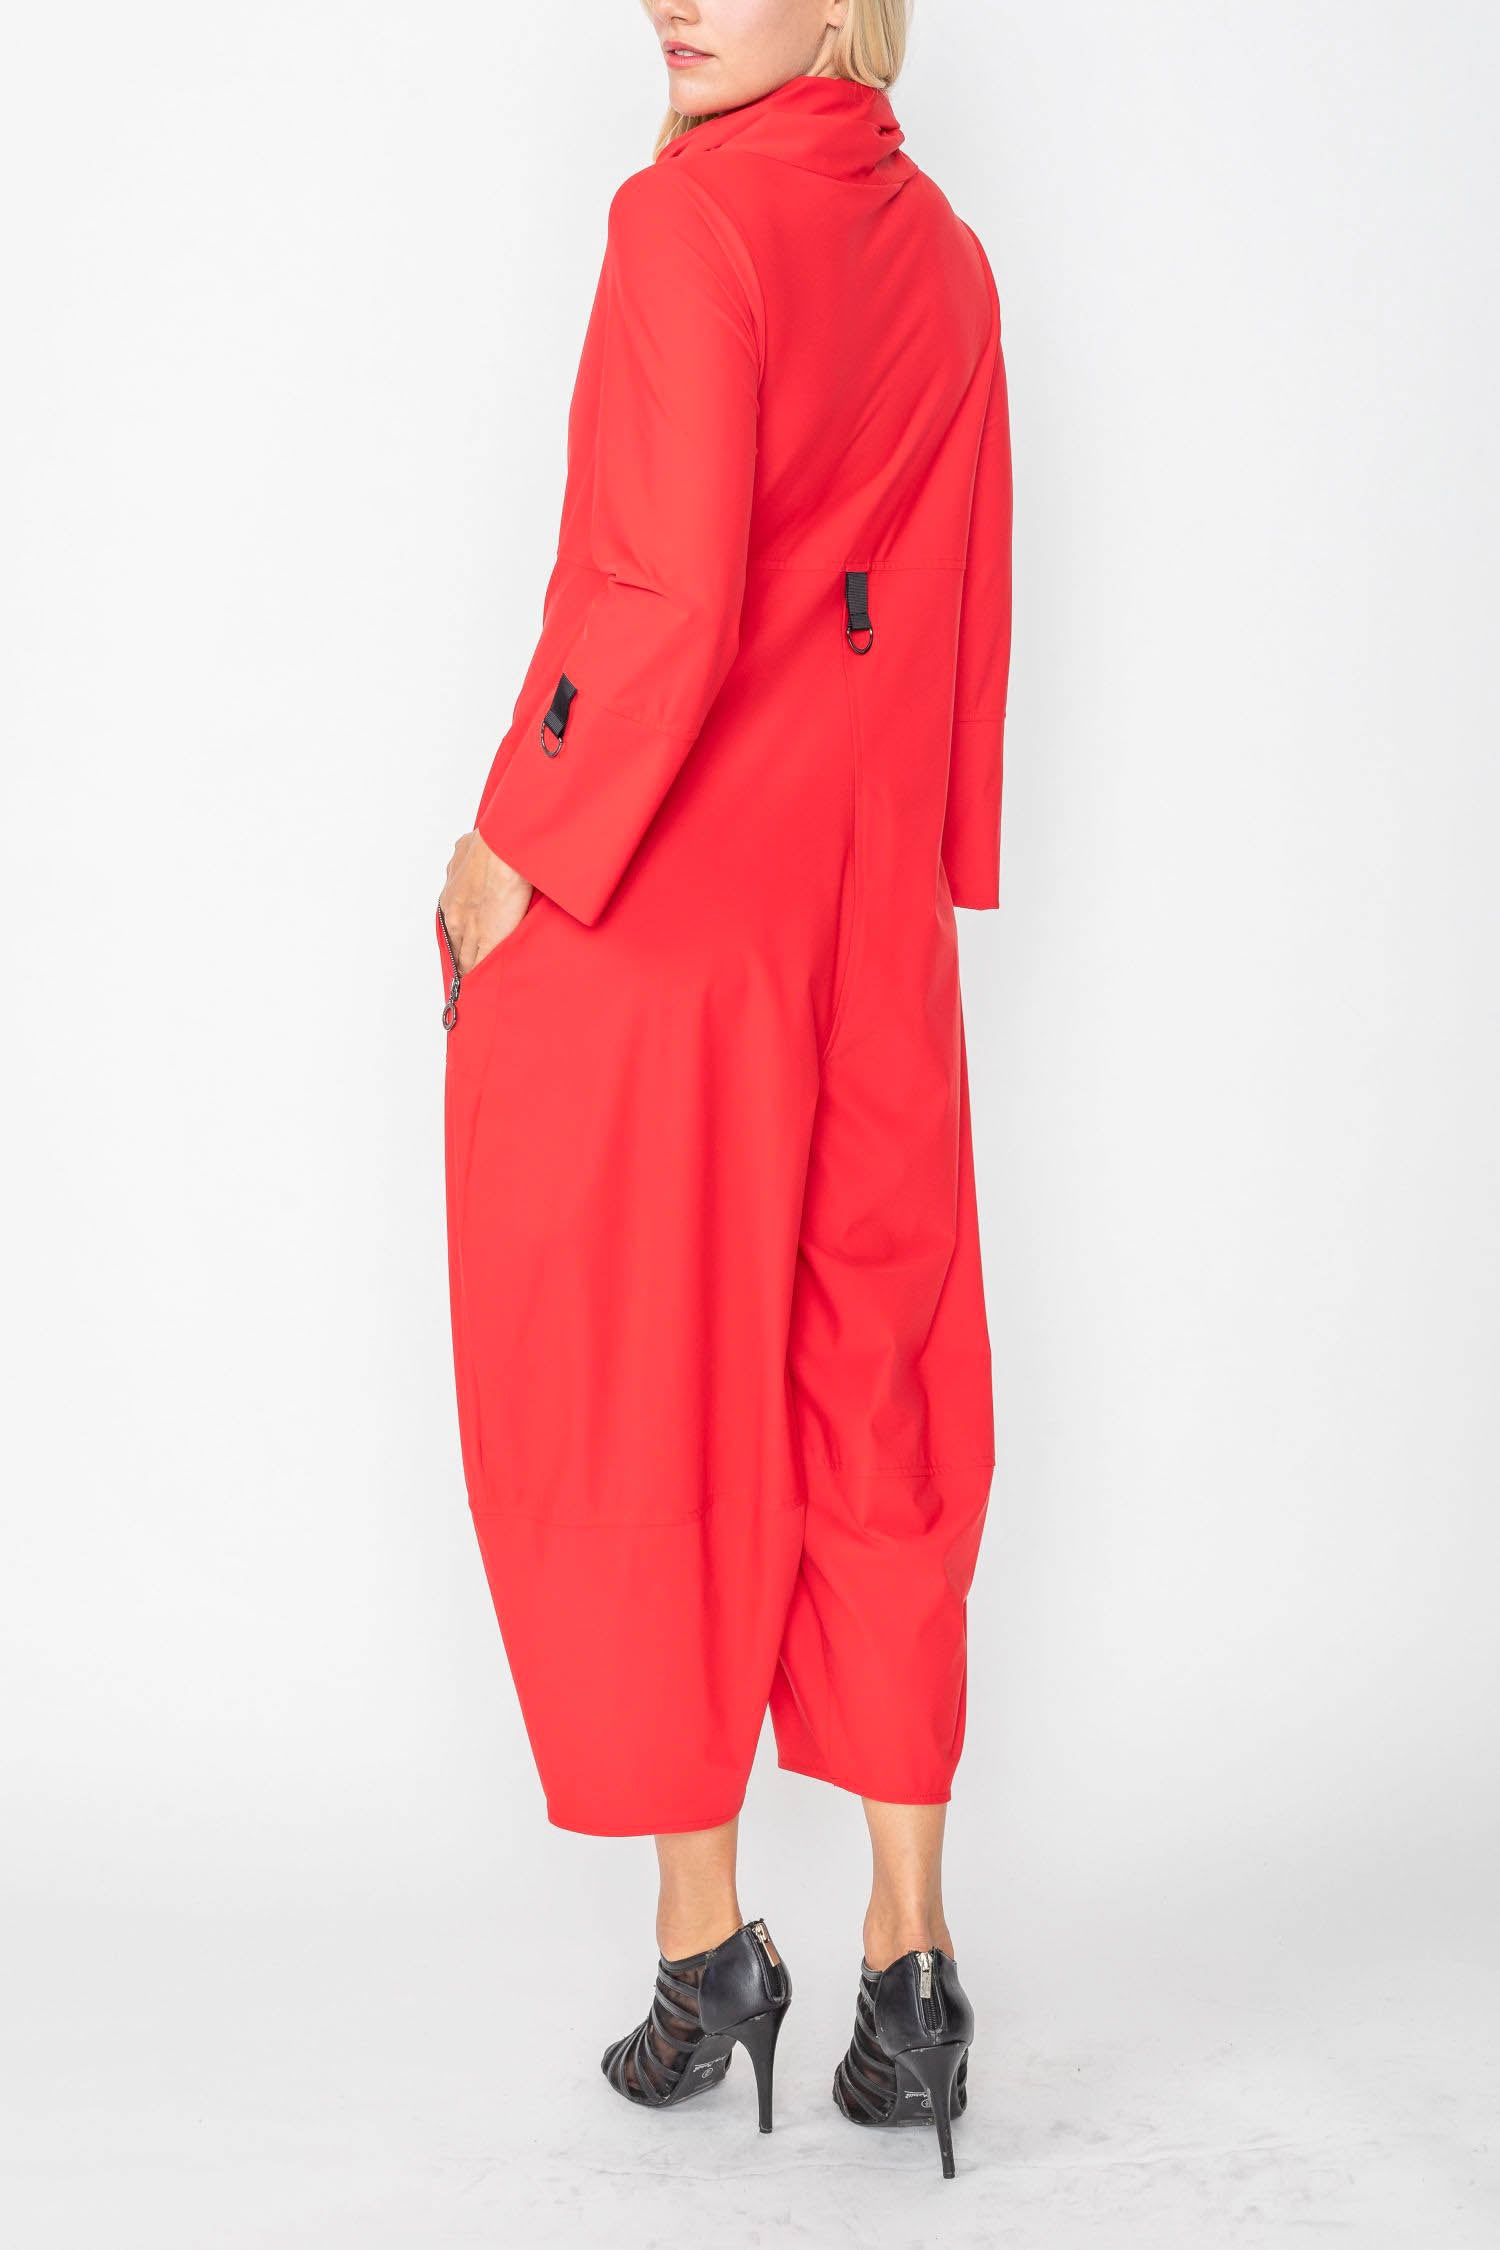 Red Zip-Up Front Cropped Long Sleeve Jumpsuit - Small / Red